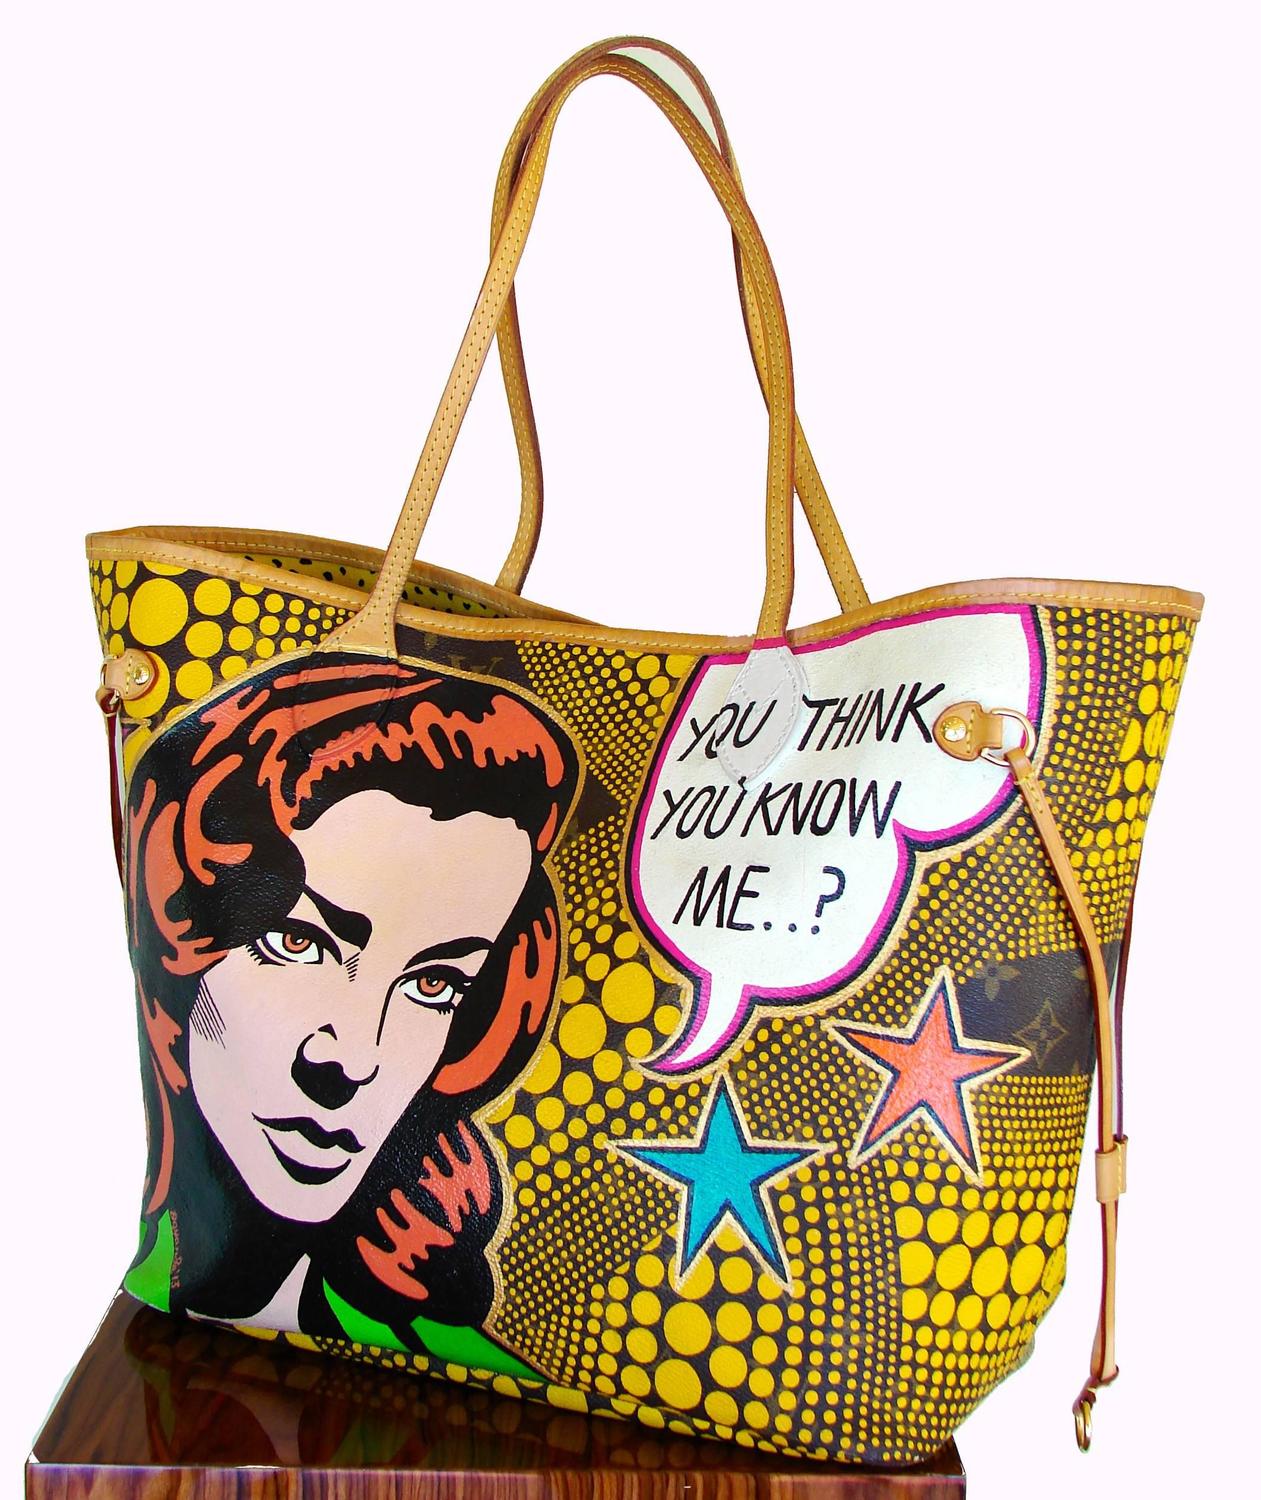 Custom Louis Vuitton Neverfull MM Tote Bag by Boyarde Pop Art Rare One-Of-A-Kind For Sale at 1stdibs